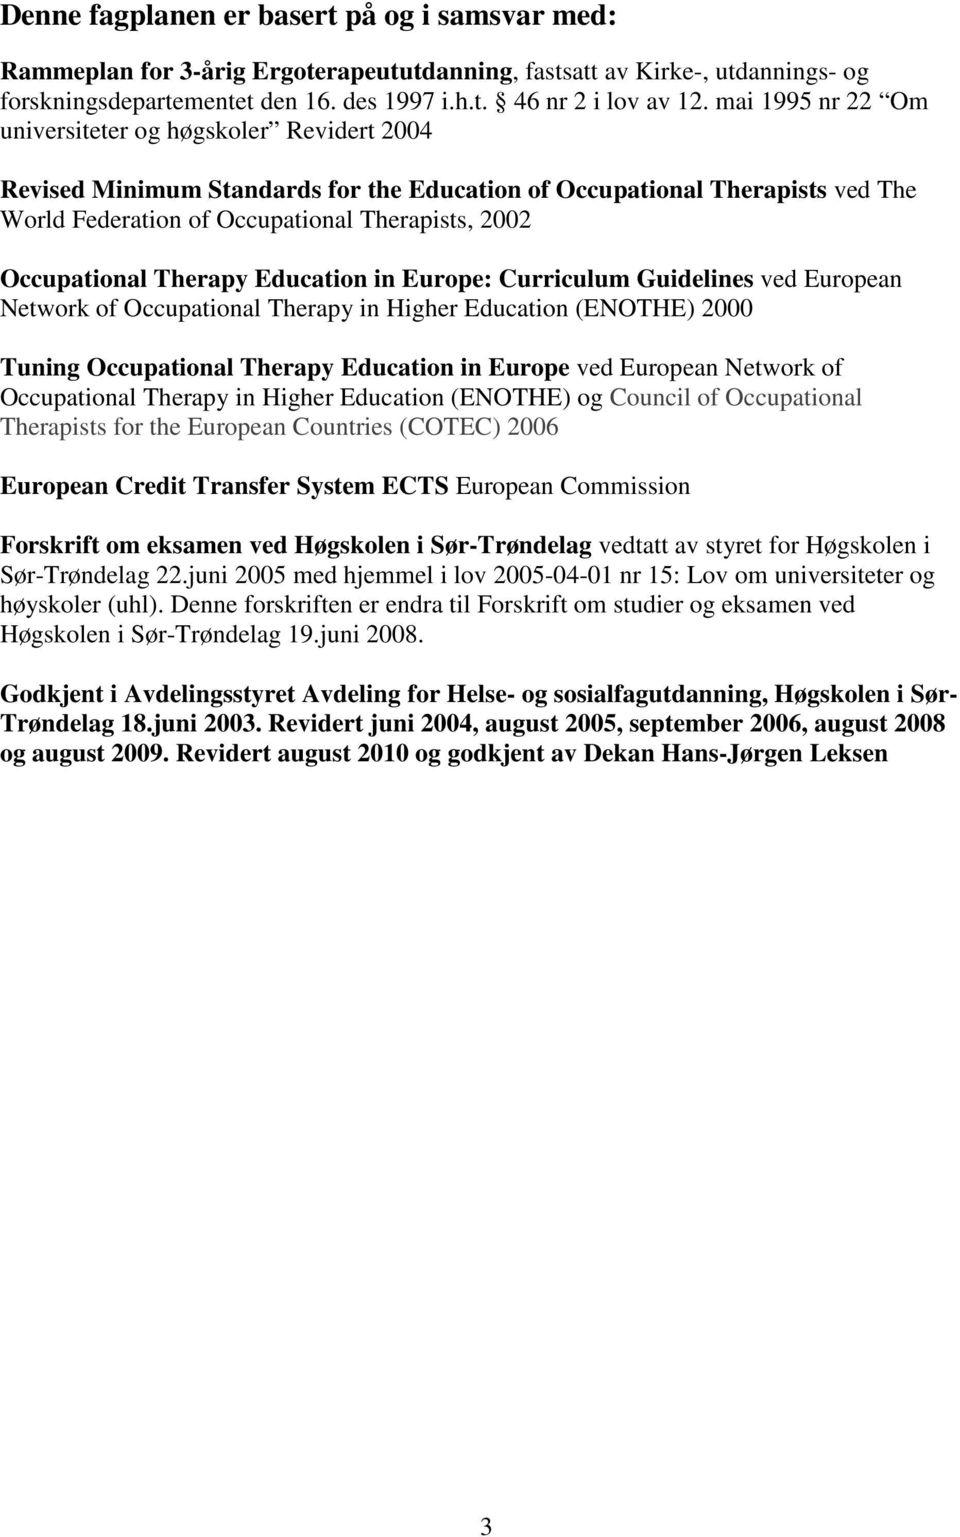 Occupational Therapy Education in Europe: Curriculum Guidelines ved European Network of Occupational Therapy in Higher Education (ENOTHE) 2000 Tuning Occupational Therapy Education in Europe ved